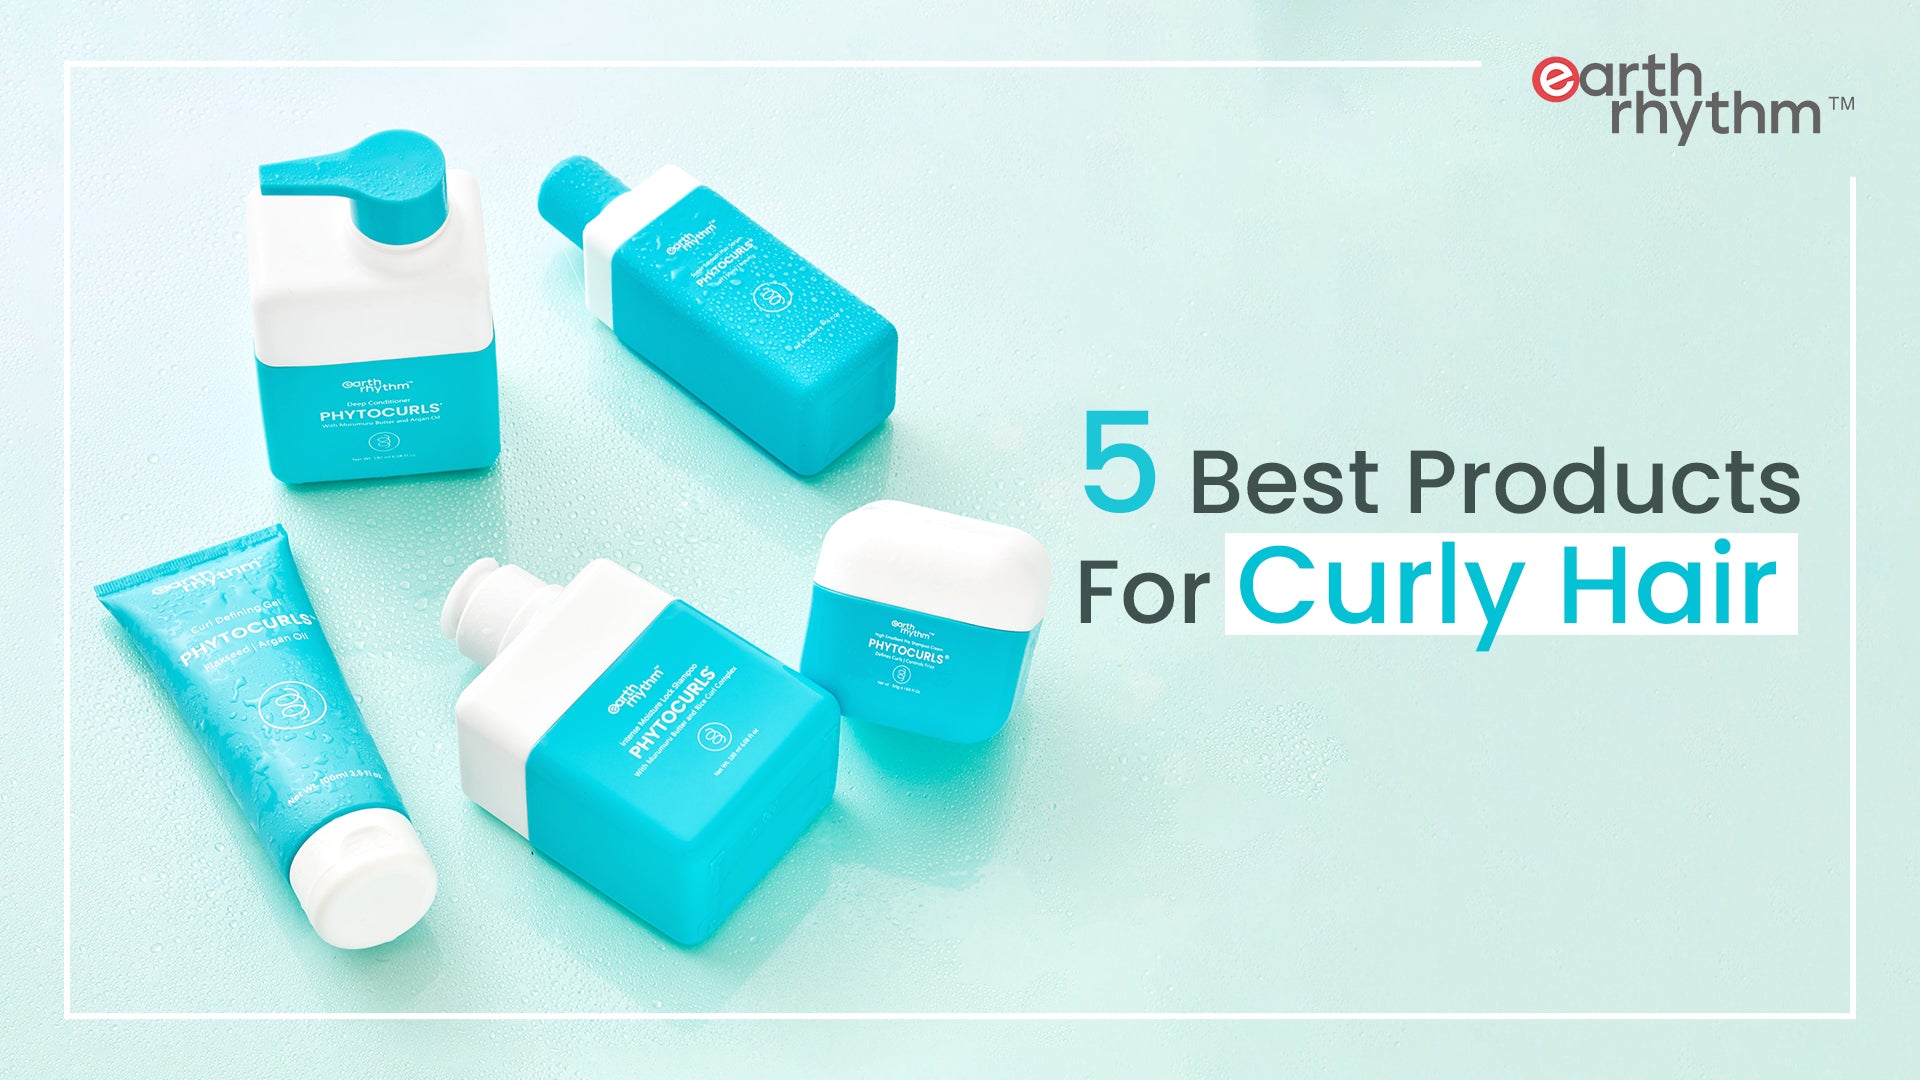 Flaunt Your Curls with the Ideal Curly Hair Care Routine